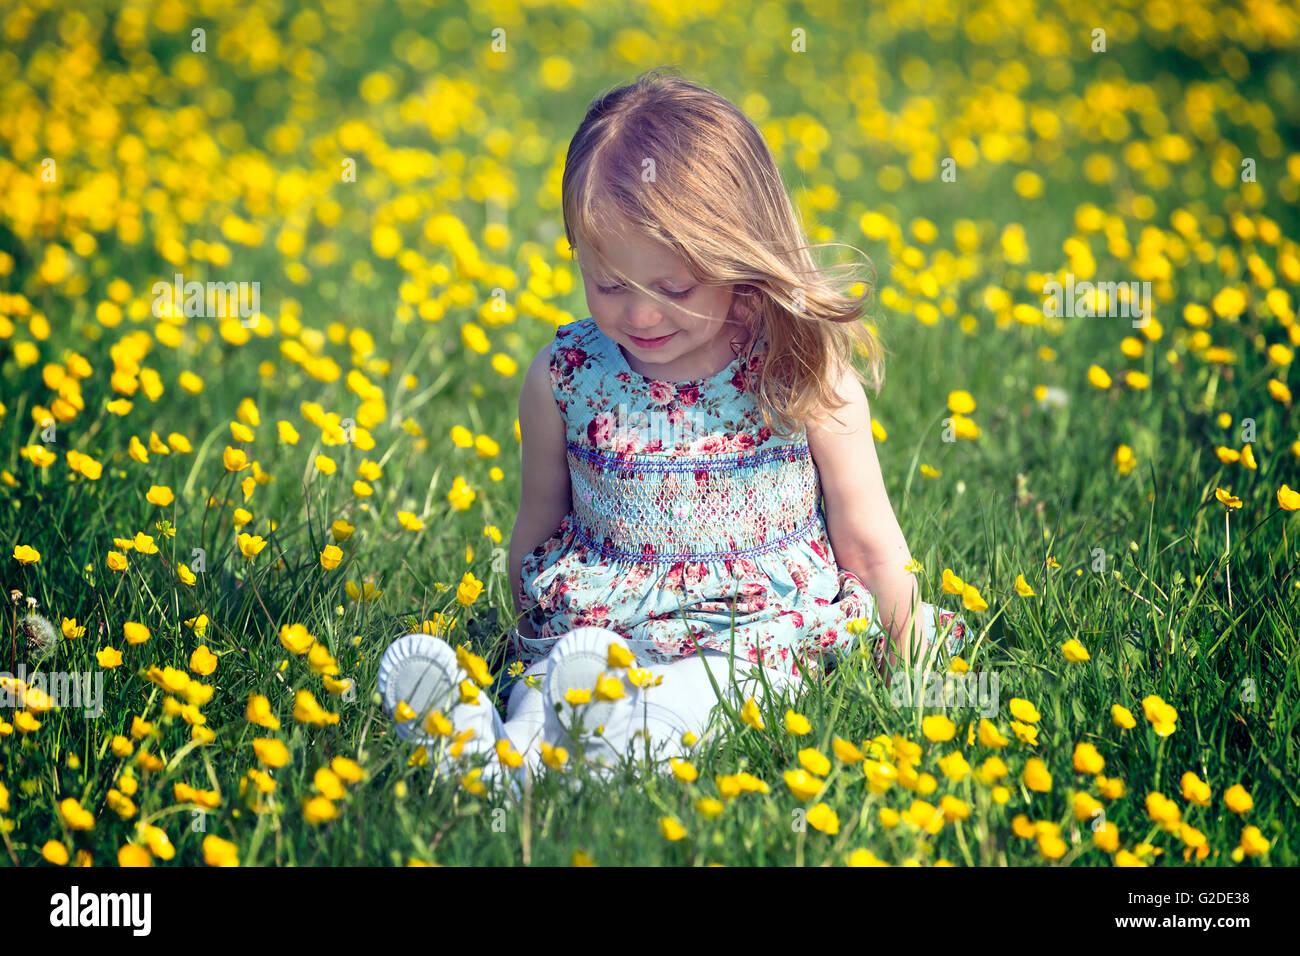 3 year old girl - Stock Image - C047/8119 - Science Photo Library